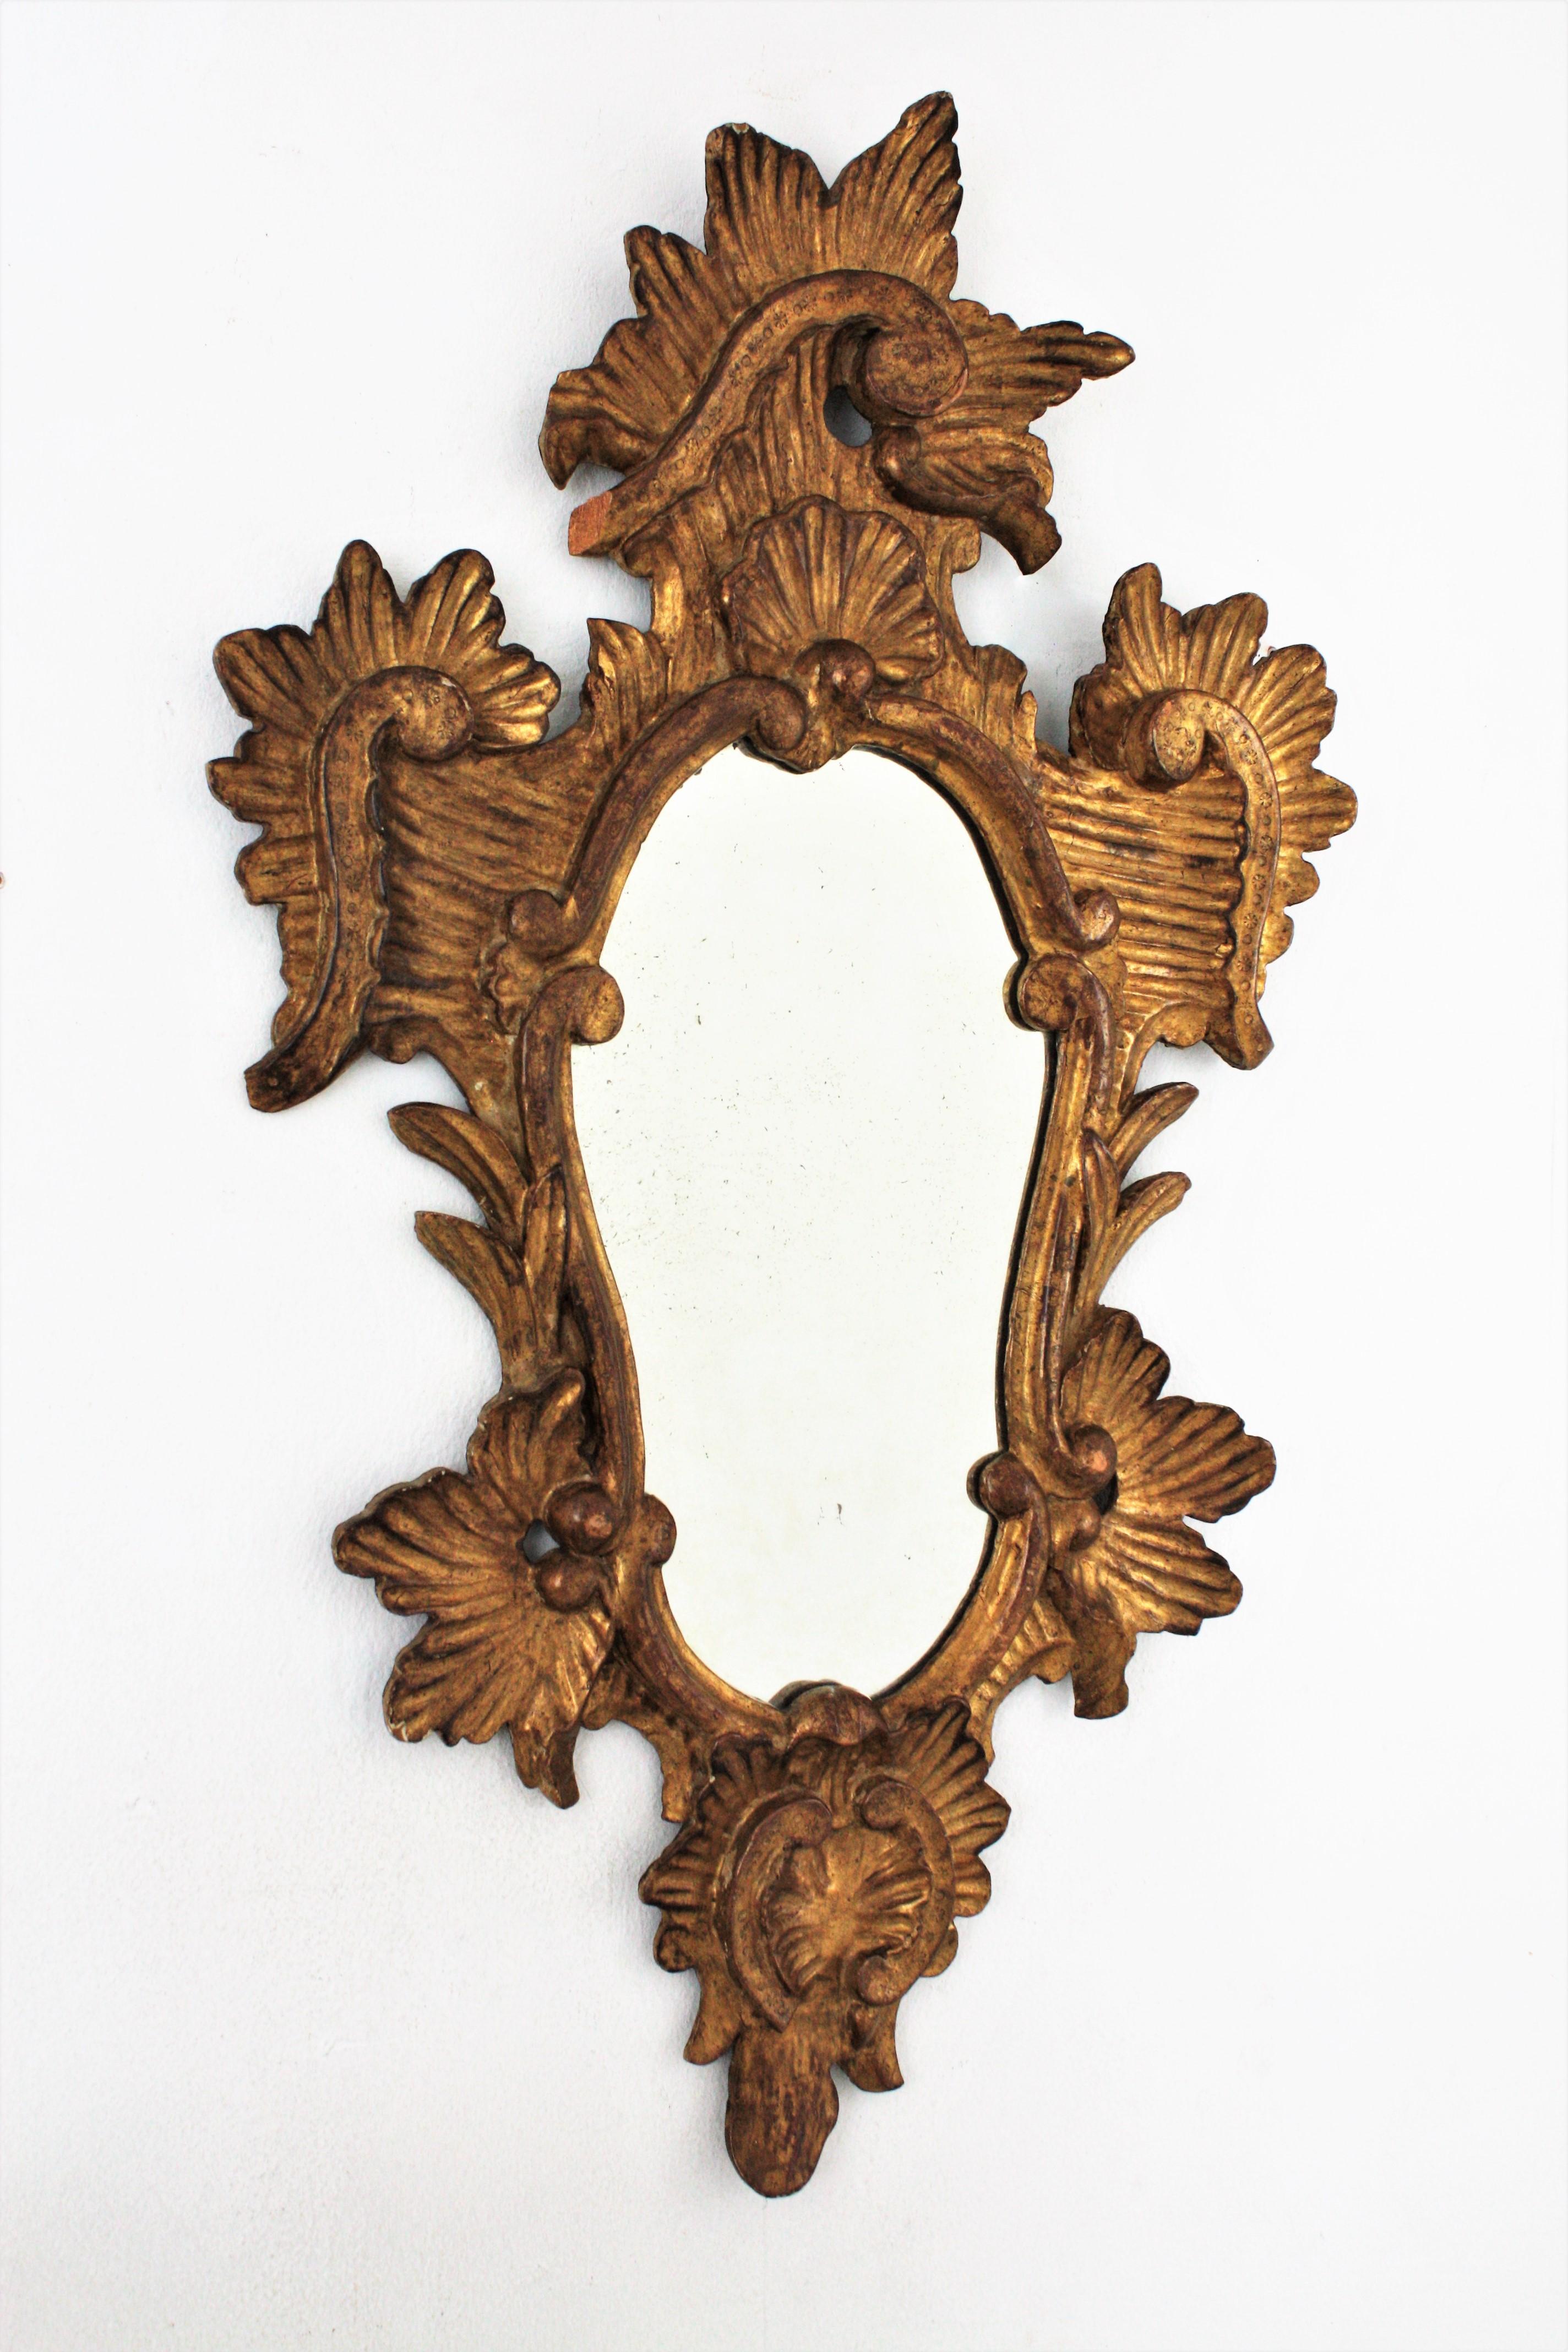 Impressive finely carved gold gilt wood Rococo style wall mirror or console mirror. Italy 1930-1940s.
This highly decorative wood carved scrolls and leaves decorated frame is covered with gesso and shows a beautiful original antique patina and gold